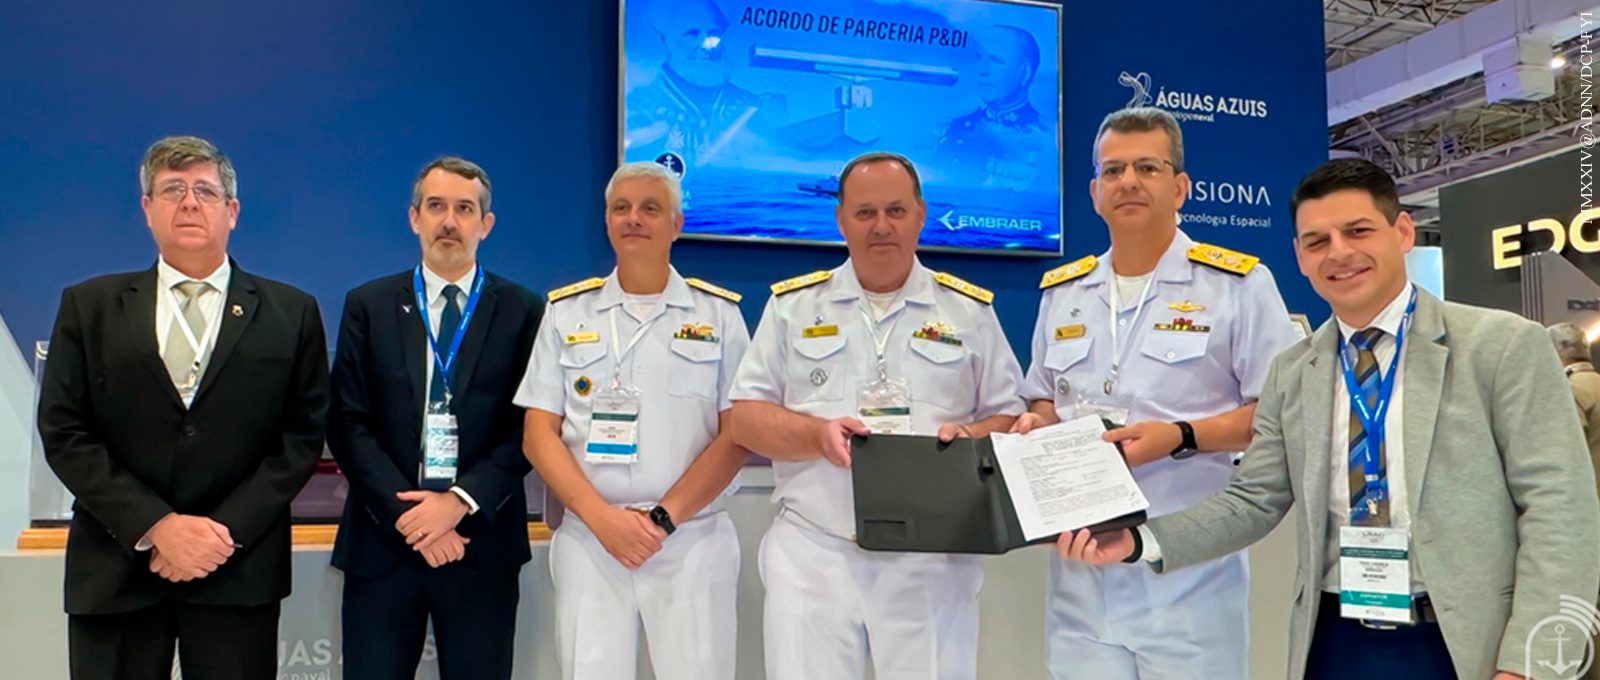 Brazilian Navy and Embraer sign technology partnership agreement